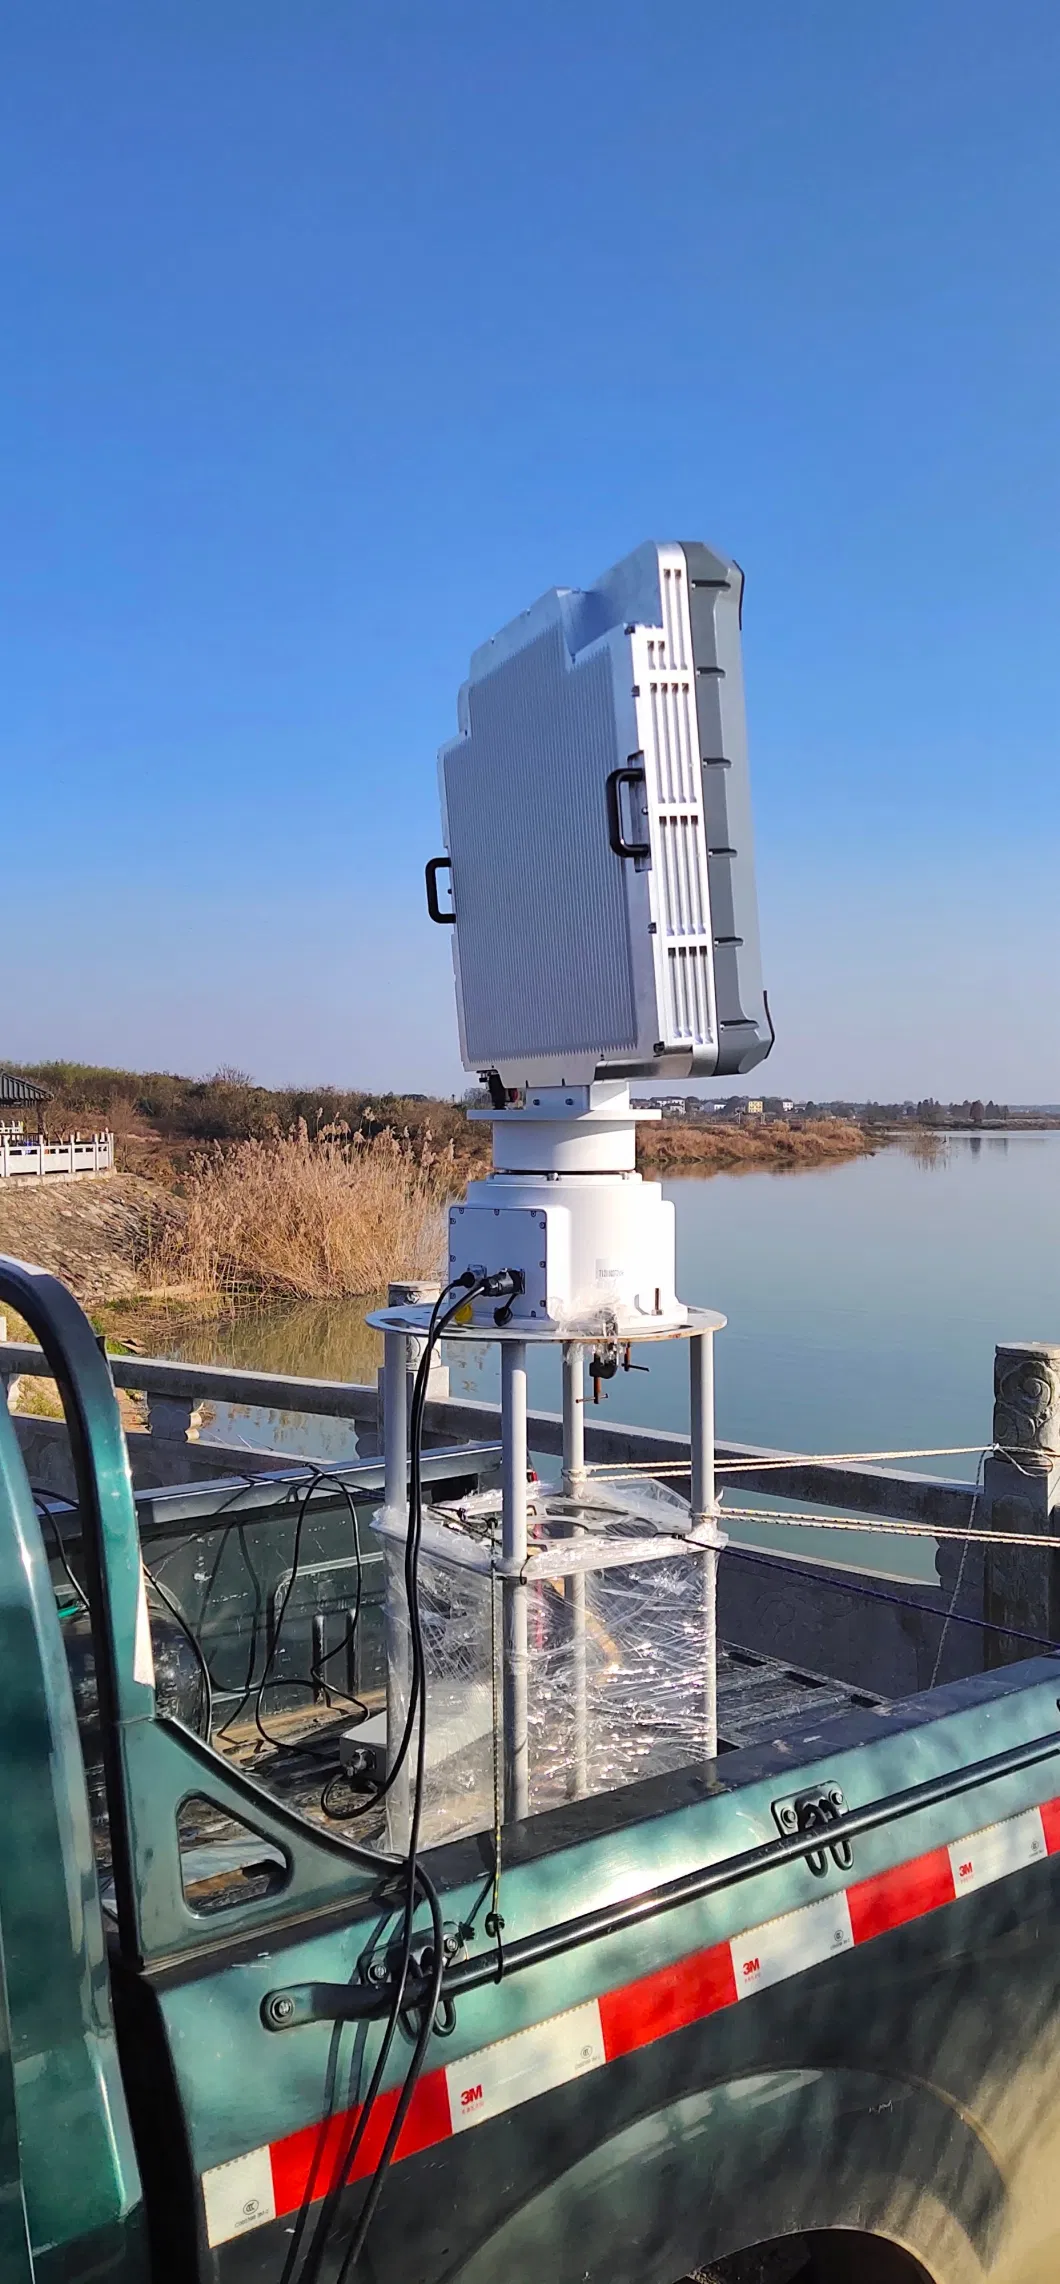 Long Range and Medium Range Radars for Air-Based Air Surveillance in Highly Mobile Configurations